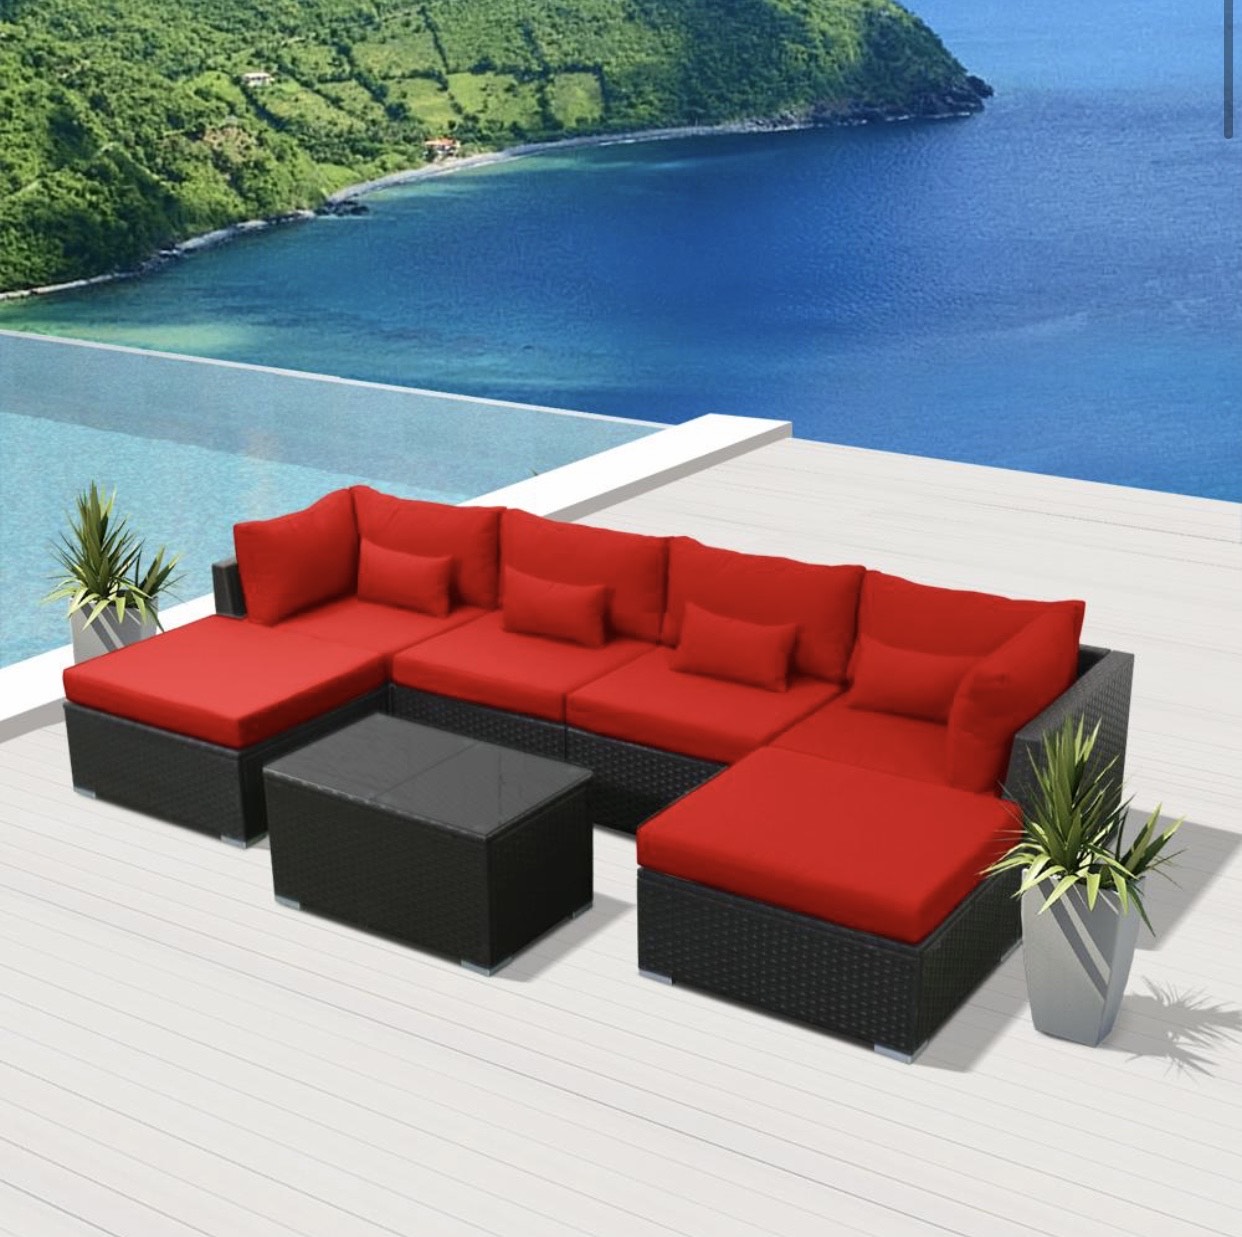 Crimson Red 7C Replacement Cushion Covers Outdoor Patio Furniture Set (Without Foam Insis)